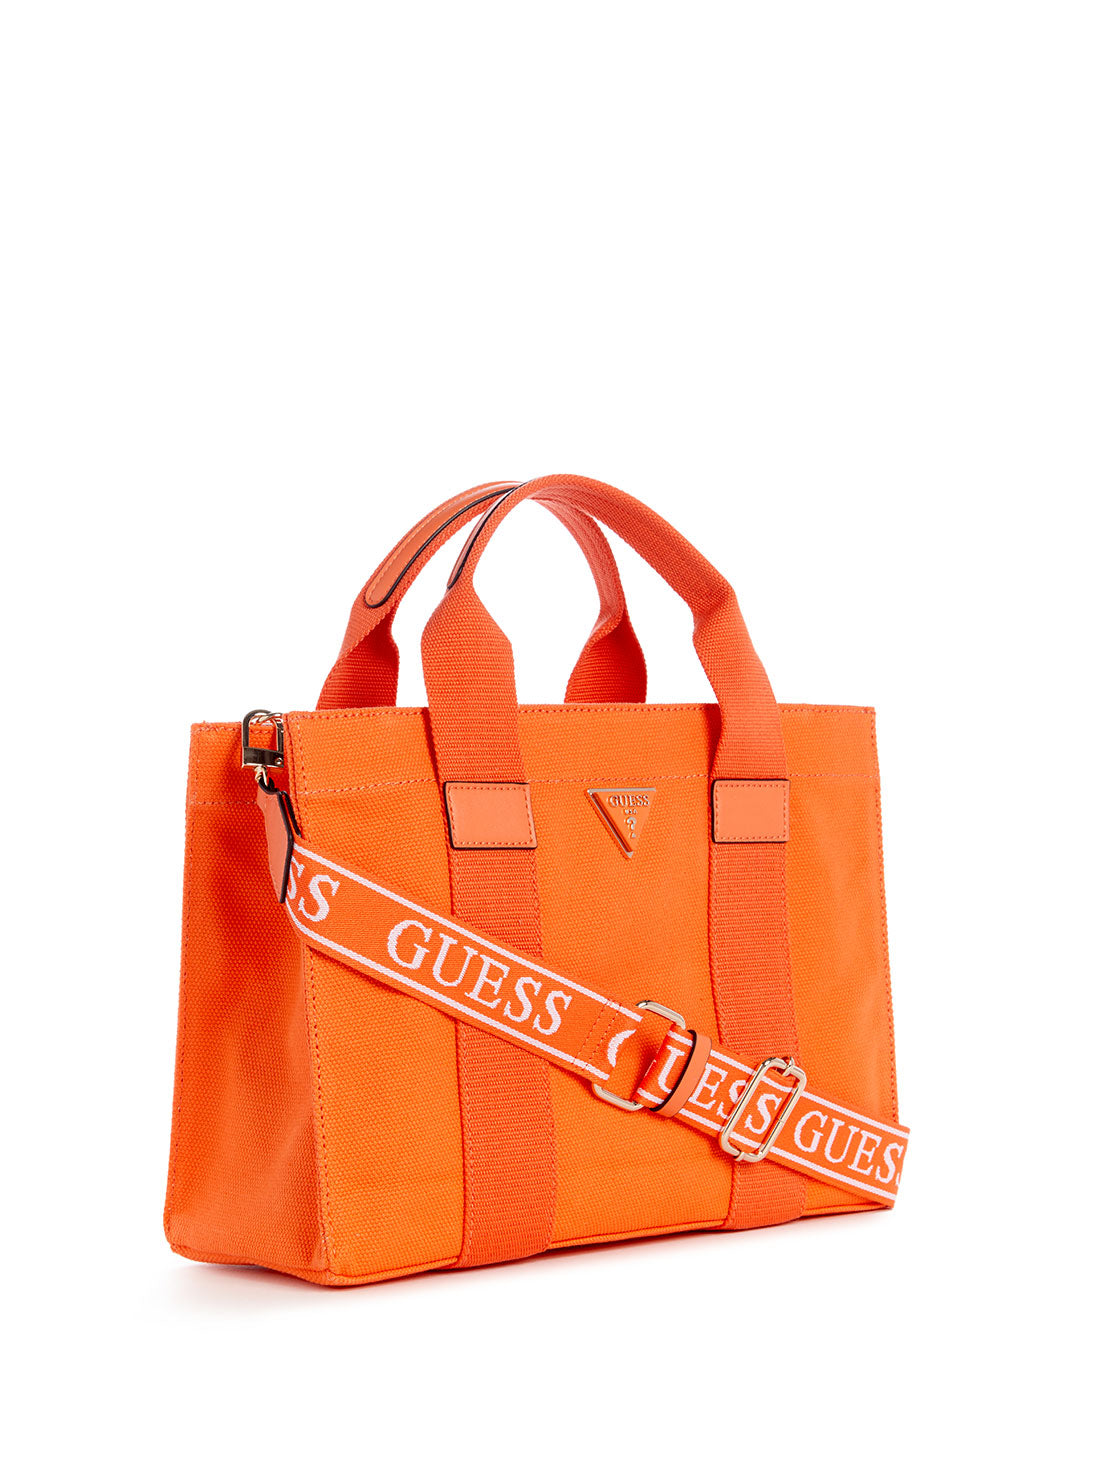 GUESS Orange Canvas Small Tote Bag side view